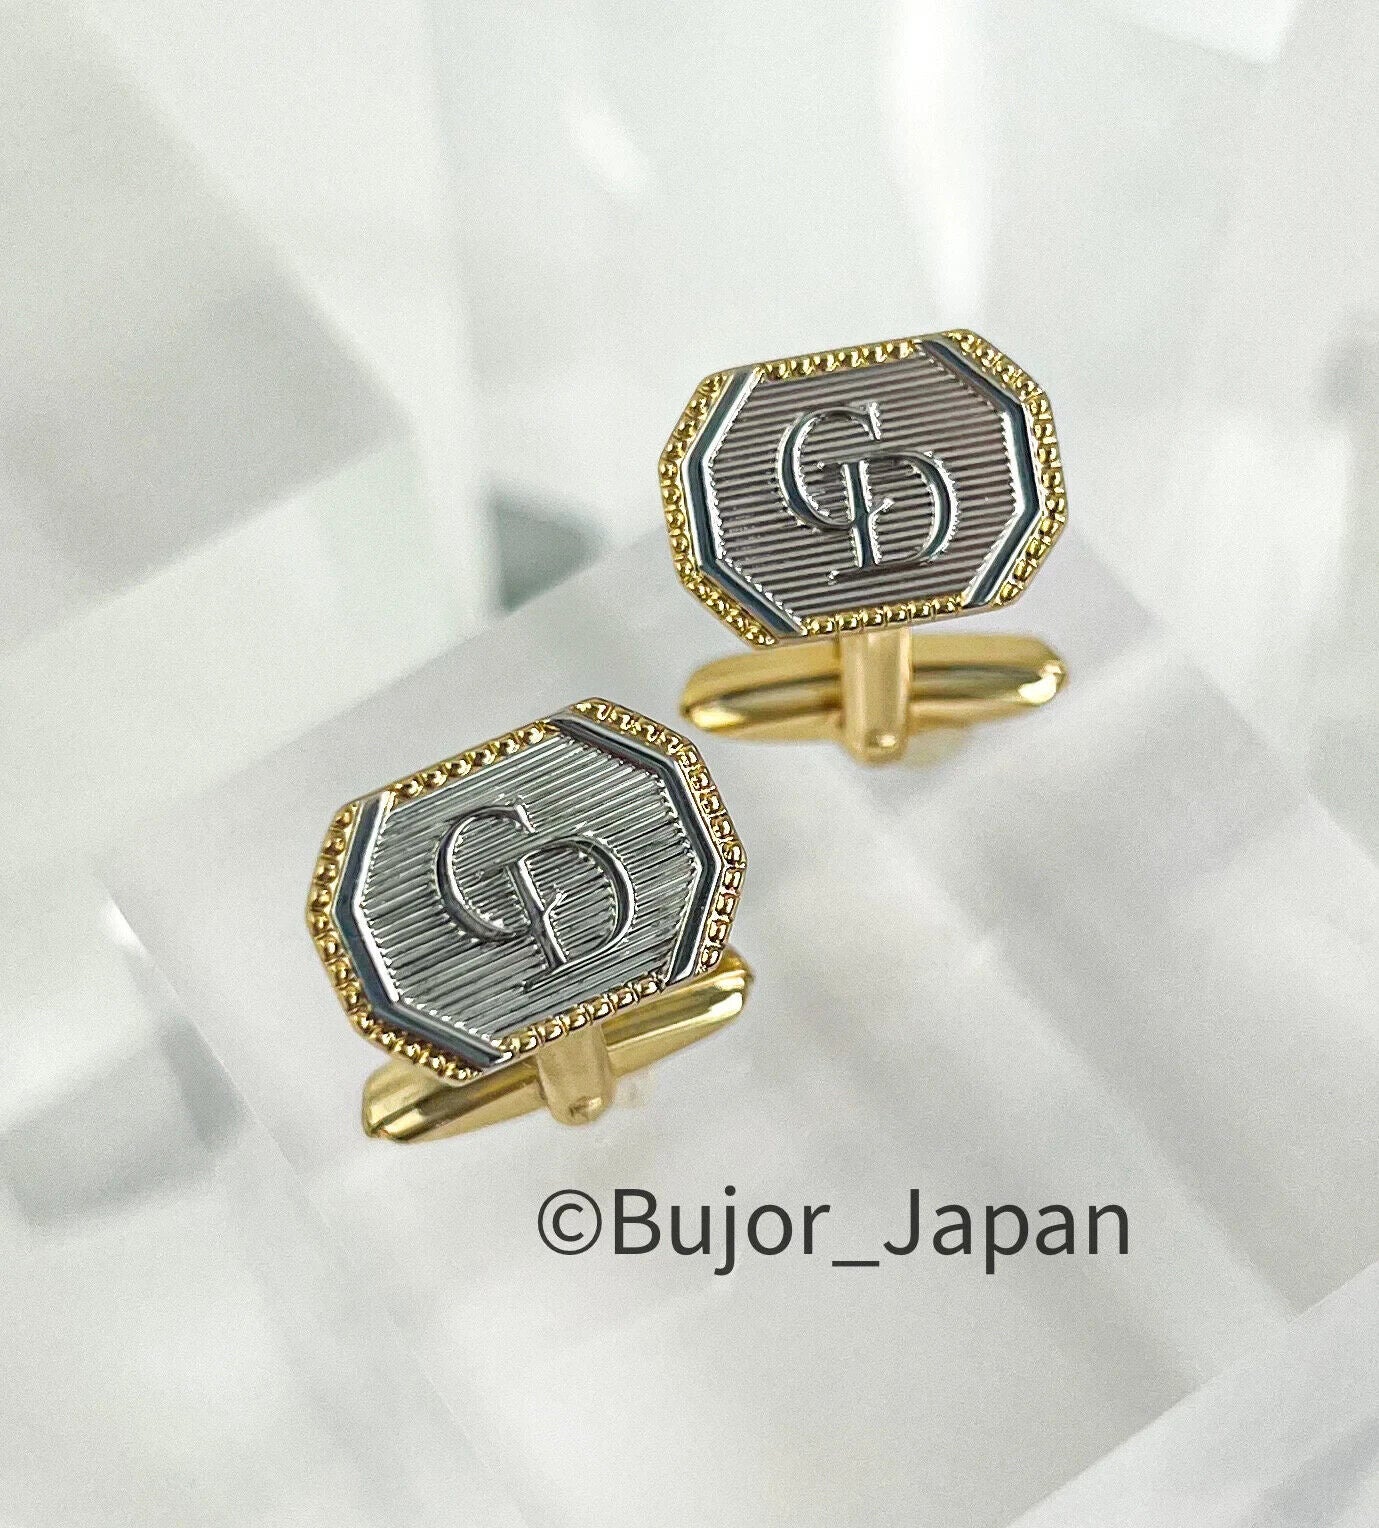 Vintage Christian Dior Cufflinks, Gold Tone Cufflinks, Vintage Cufflinks Gold,  CD initial Logo, Vintage Jewelry, Personalized Gifts, Unisex